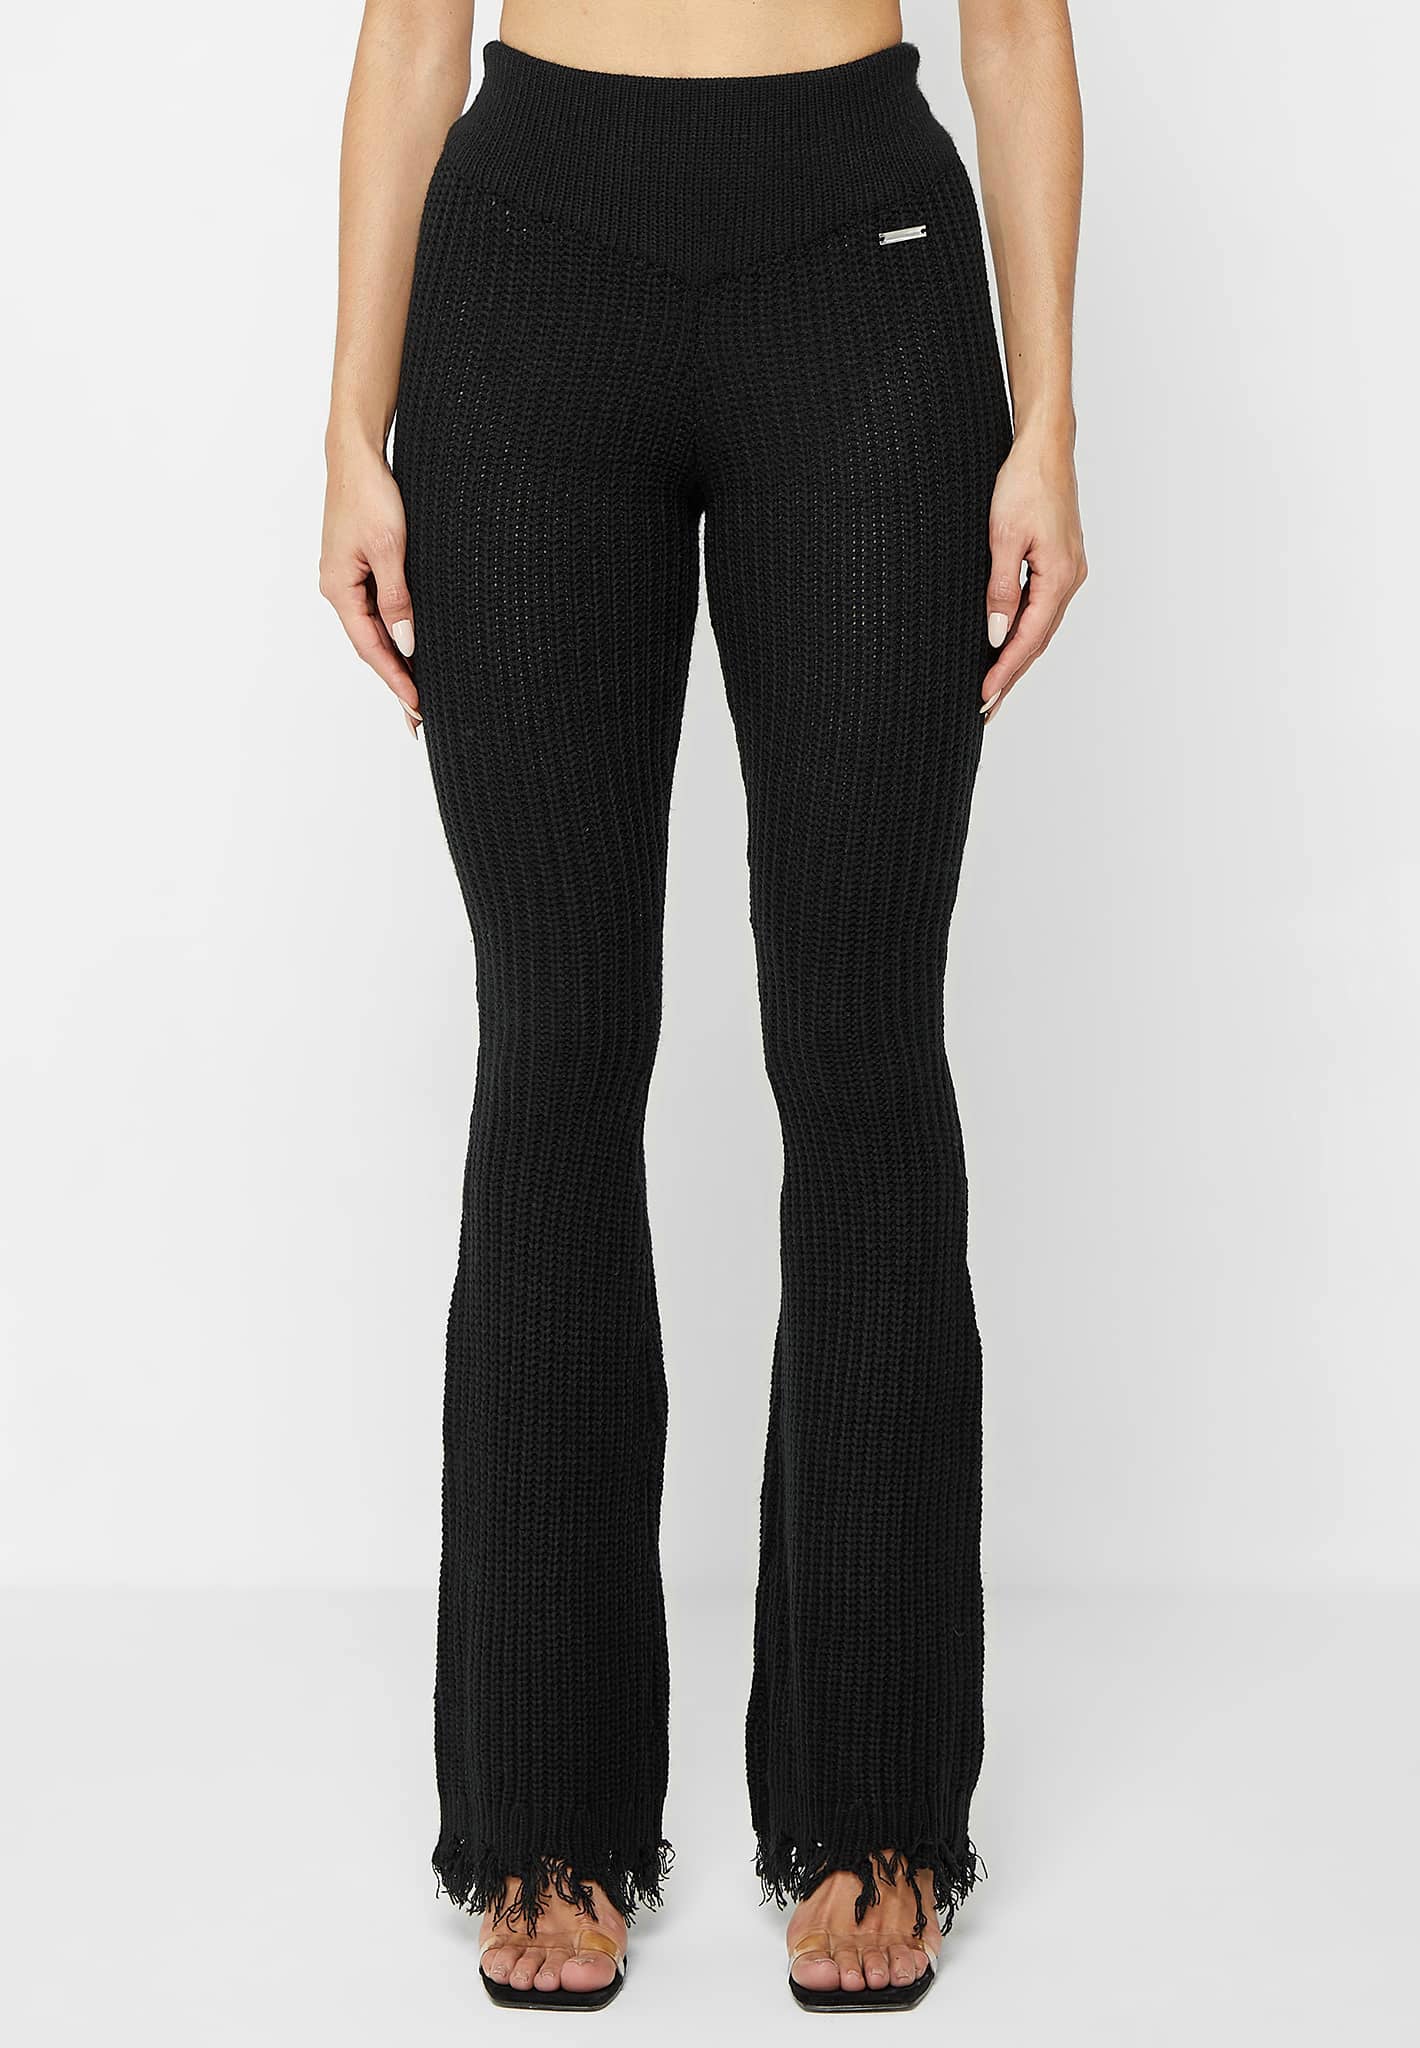 Distressed Knitted Fit and Flare Leggings - Black